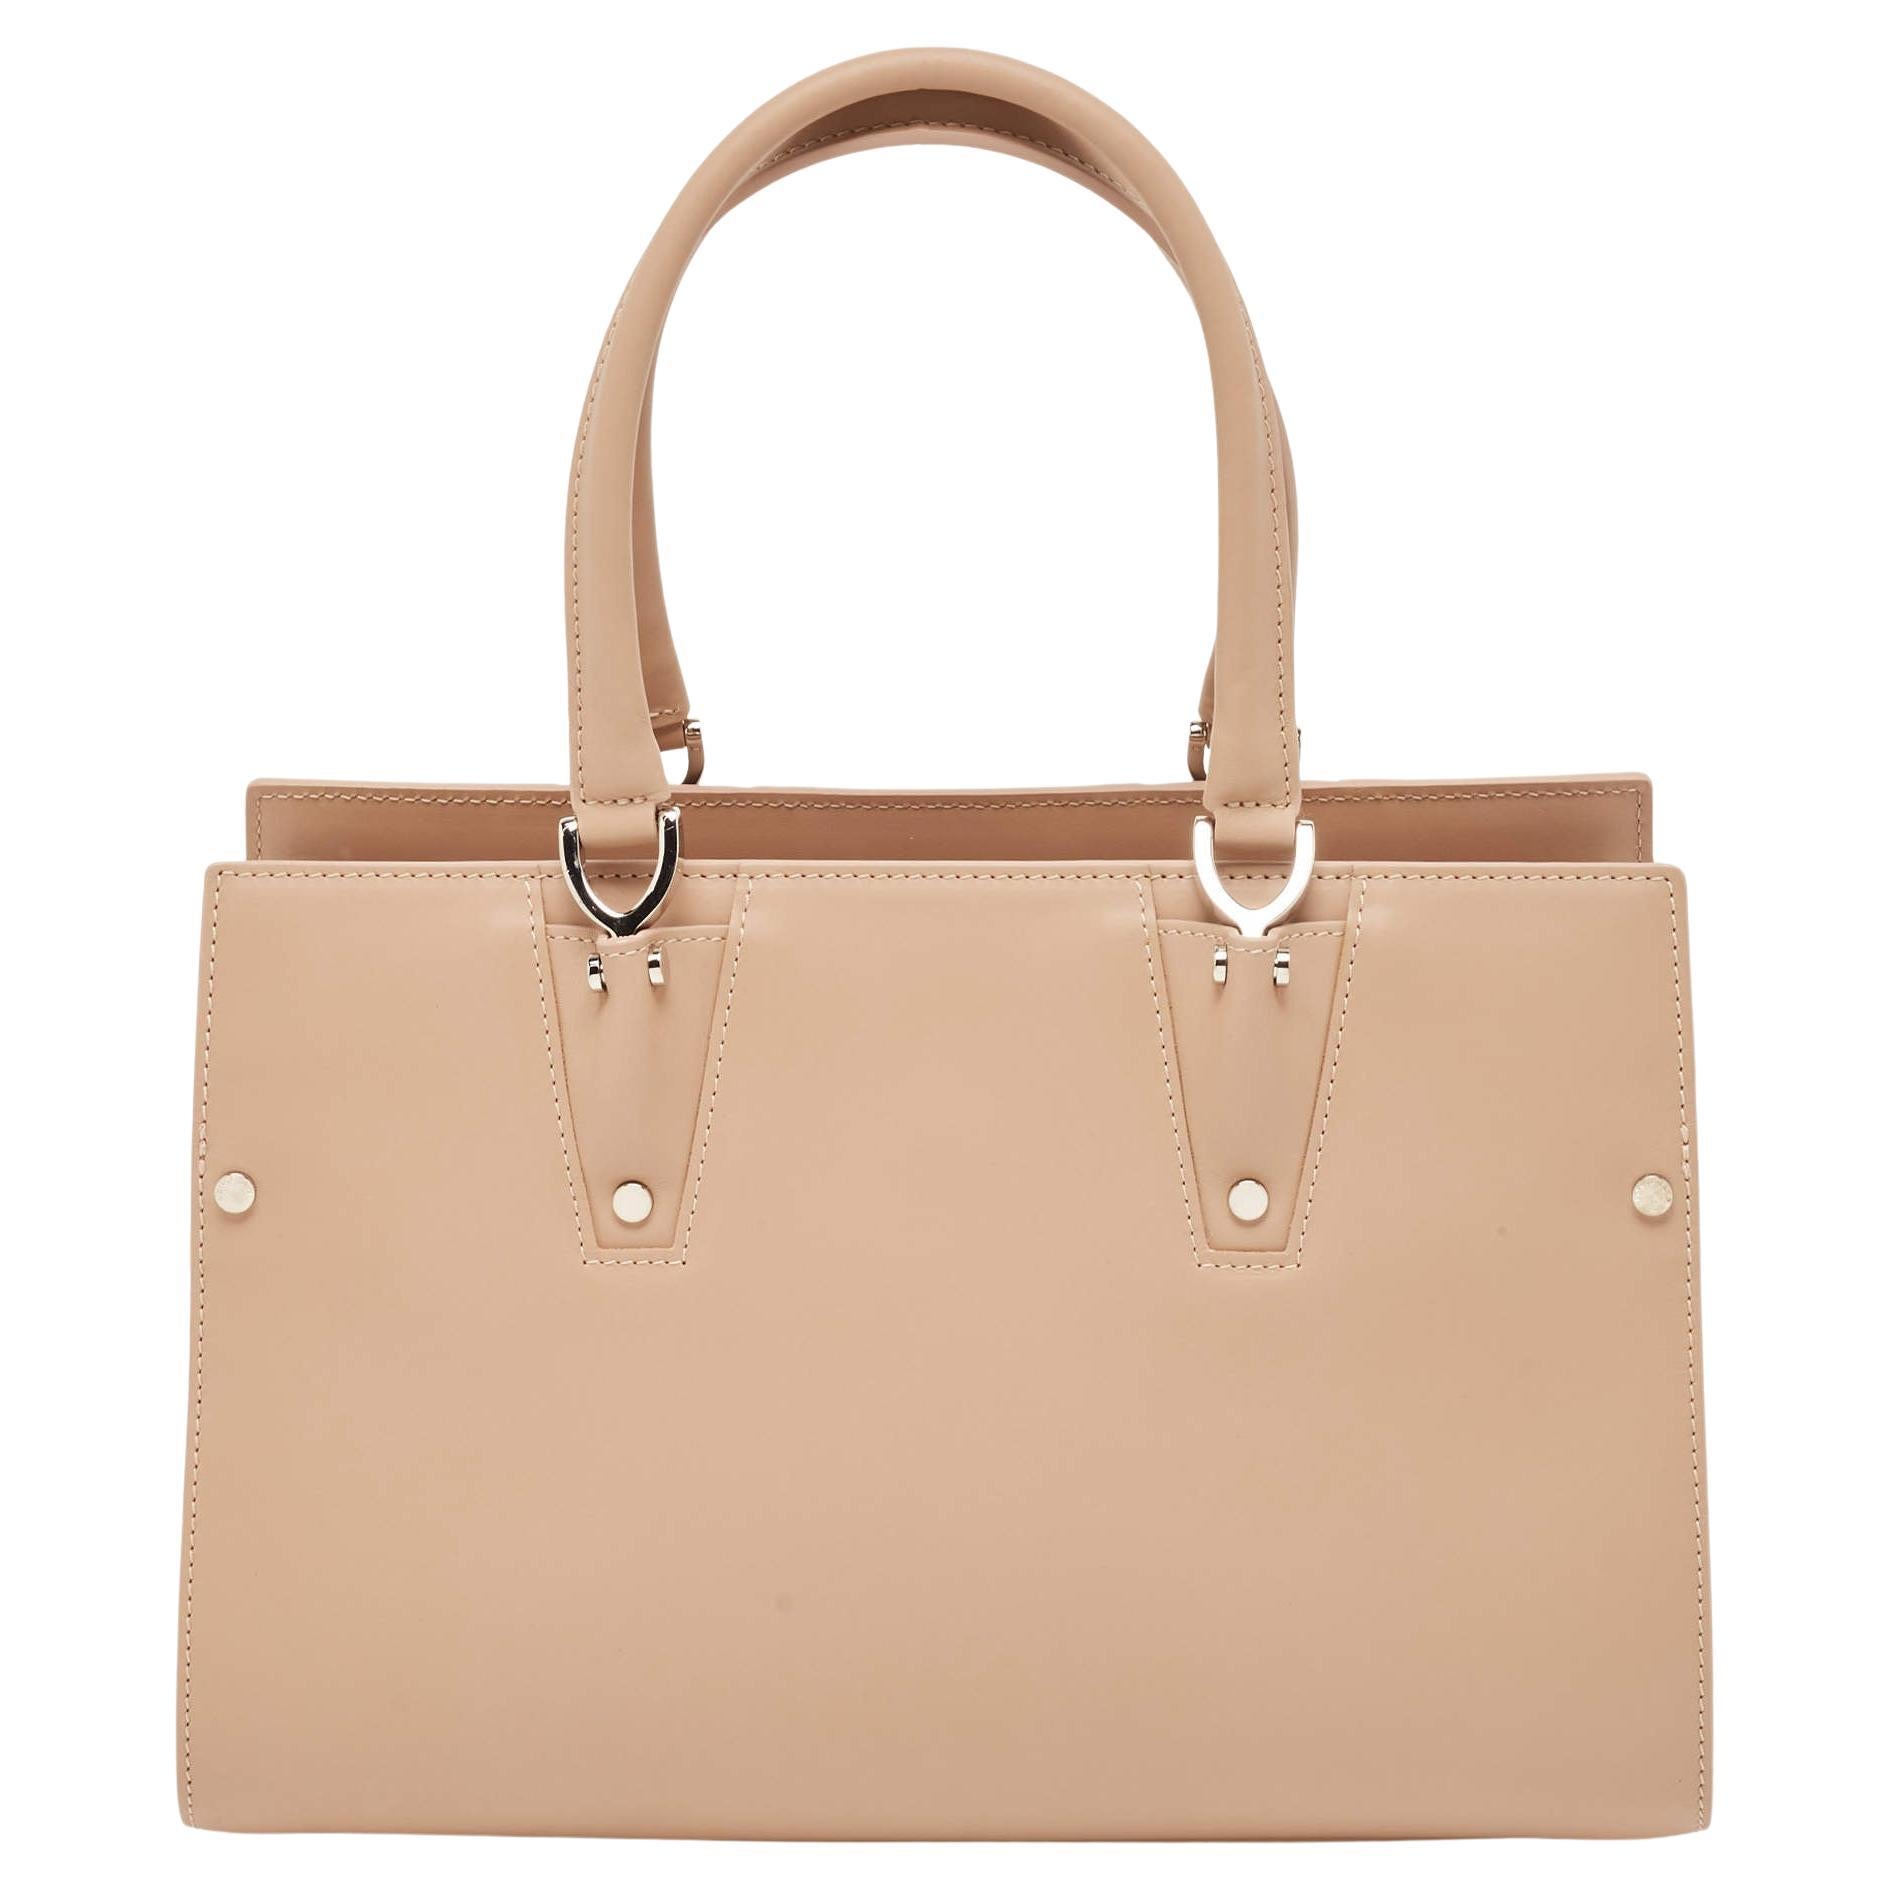 Longchamp bag: Get the Le Pliage Club tote and more for 40 to 60% off for  Black Friday 2020 - Reviewed